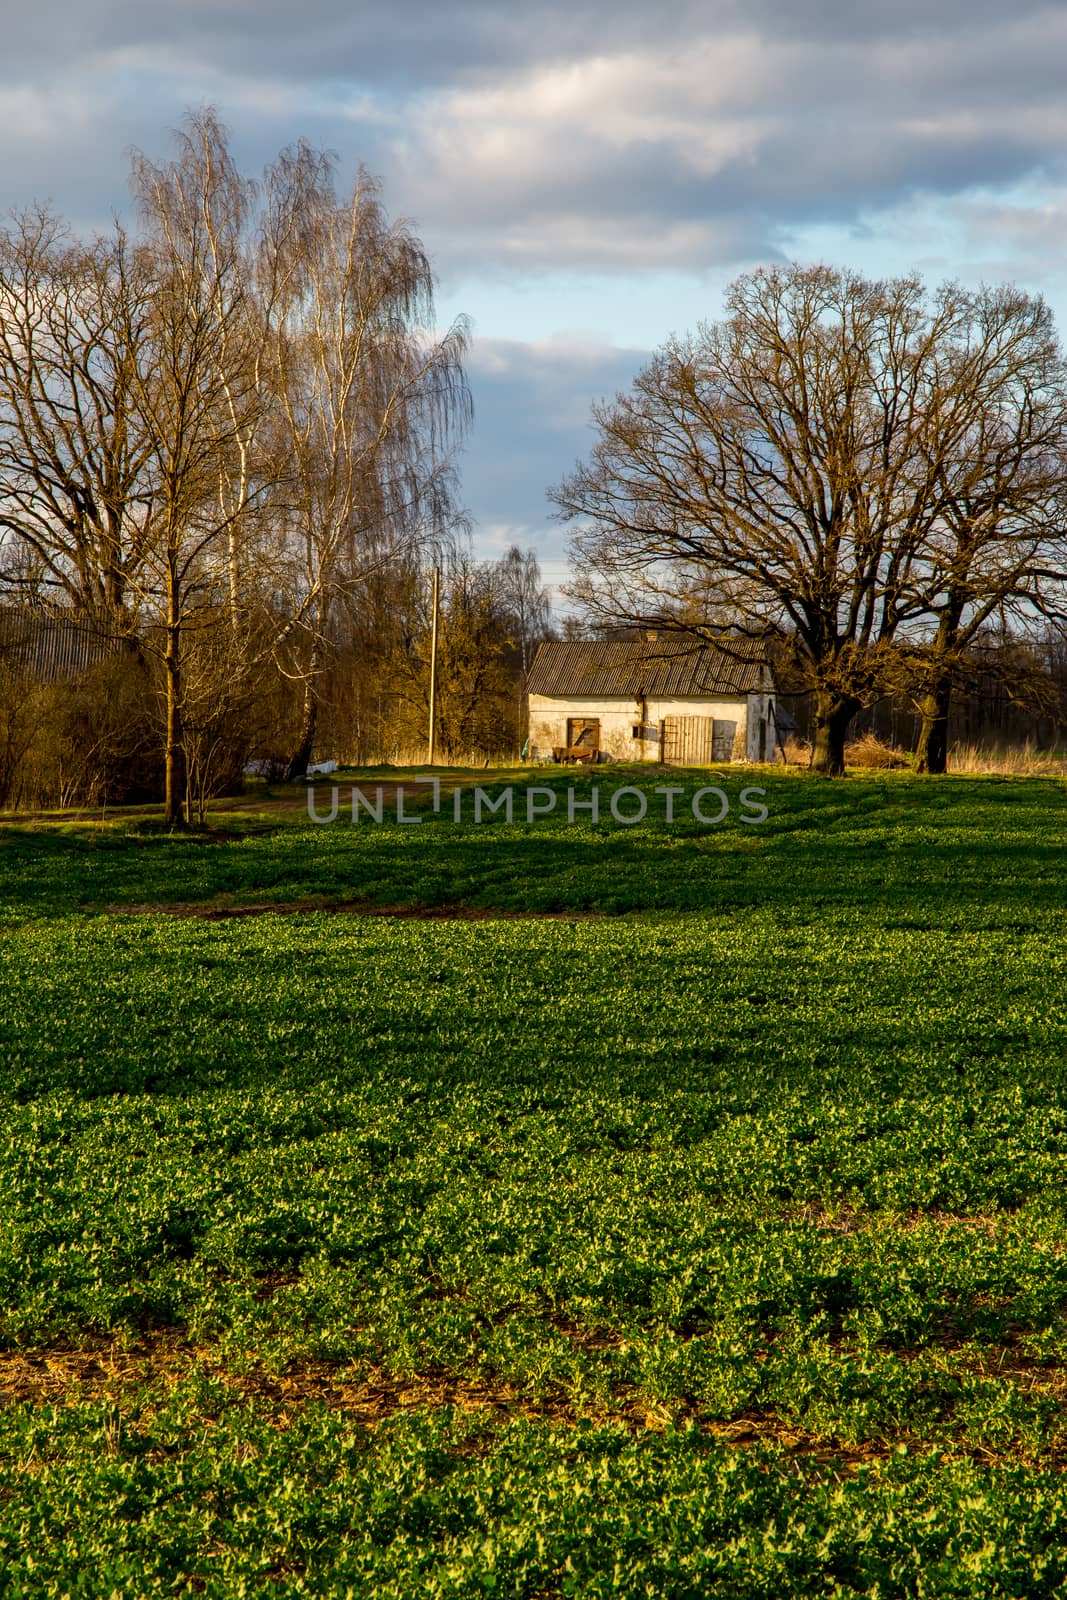 Green field with cereal and old farm house on the back, against a blue sky. Spring landscape with cornfield, wood and cloudy blue sky. Classic rural landscape in Latvia.